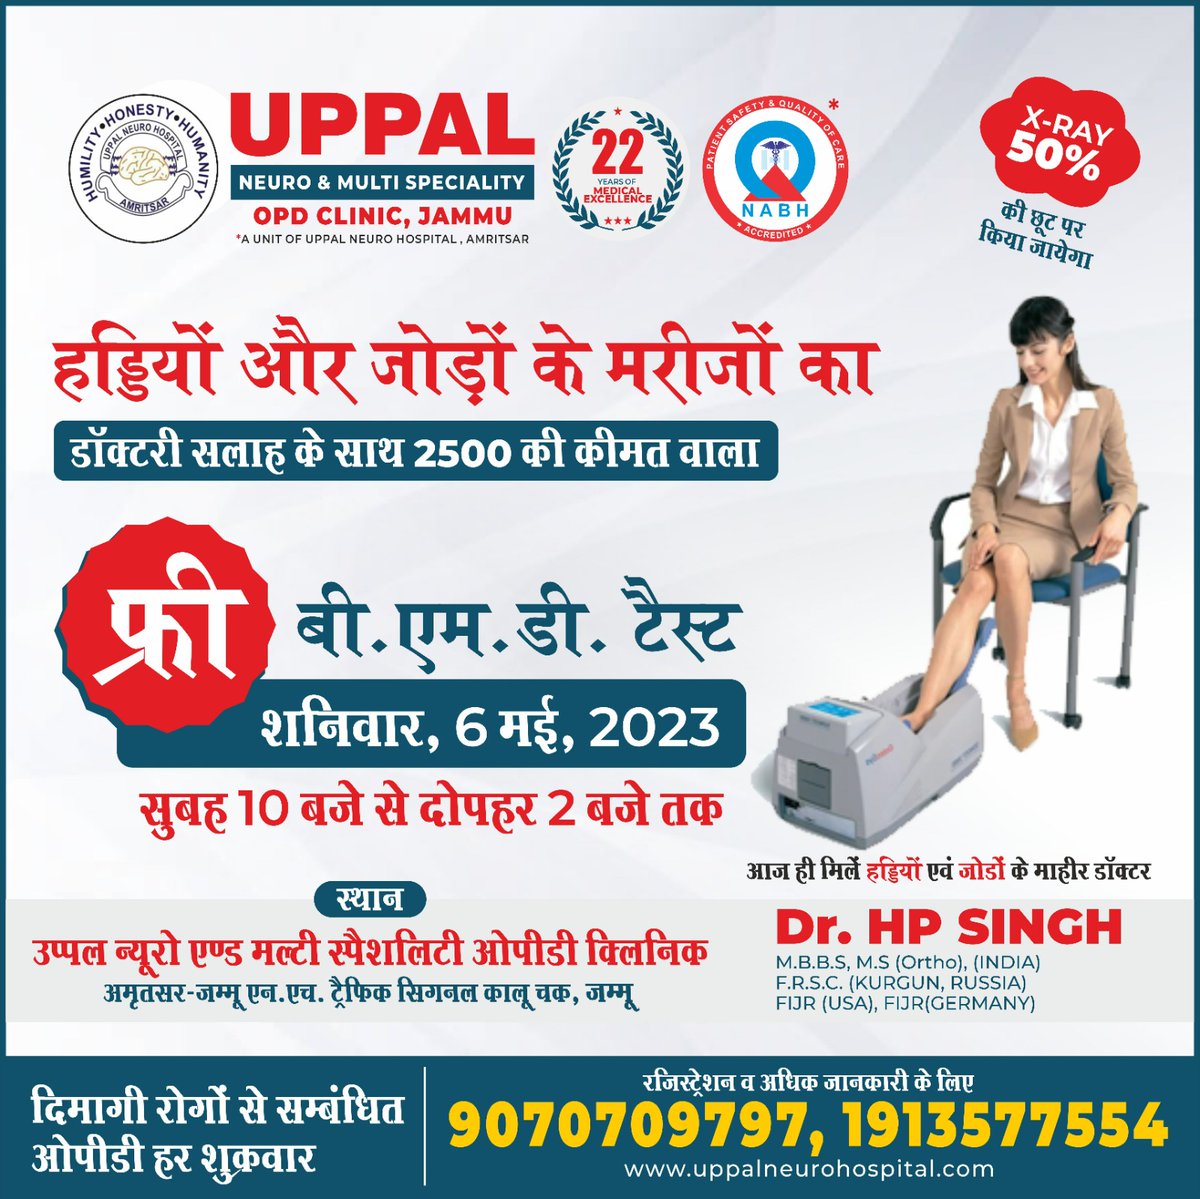 Free Ortho Check- Up Camp
📷 Free Services
📷 Free Ortho Consultation
📷 Free BMD Test
Saturday, 6 May, 2023
Morning 10 AM to Afternoon 2 PM
Venue
Uppal Neuro & Multi Specialist OPD Clinic
Amritsar-Jammu NH Traffic Signal Kalu Chak, Jammu
For Registration call
9070709797